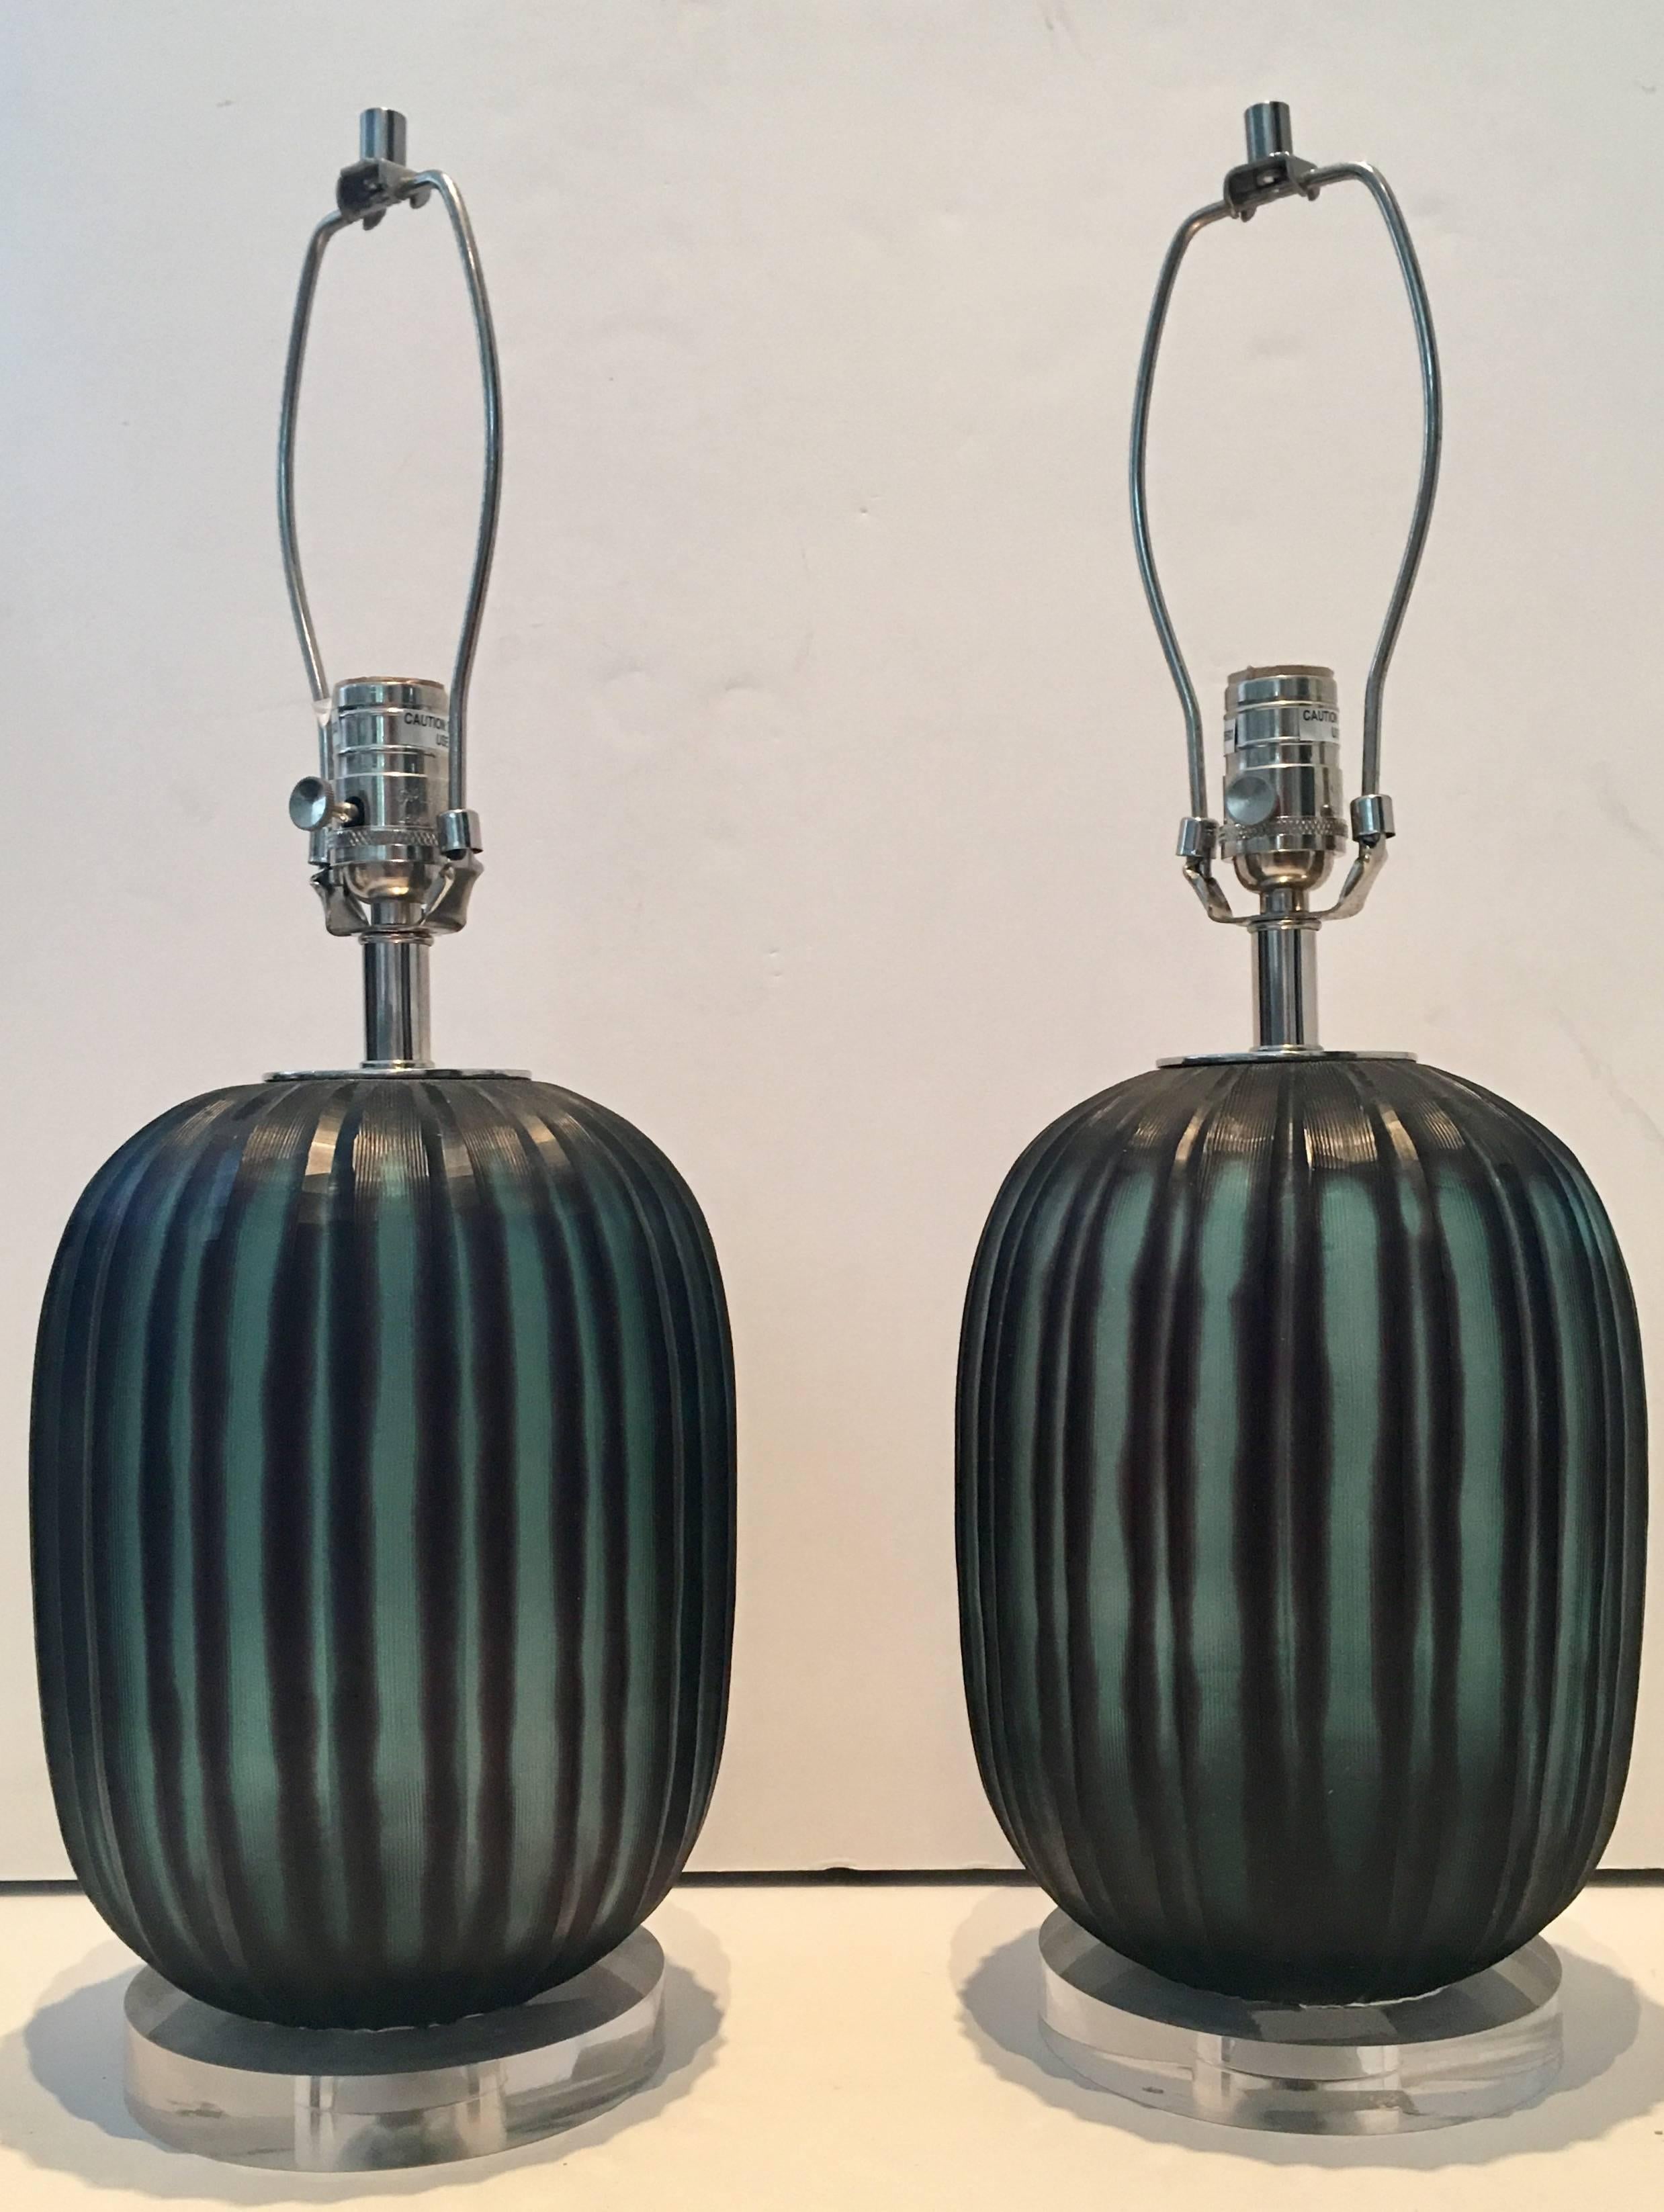 Contemporary & New Fluted & Frosted Blown Glass Lamps. Features chocolate brown and teal colored body with Lucite base and chrome fittings. Includes a pair of chrome harp and cylinder shape finials. Height to socket, 16.5